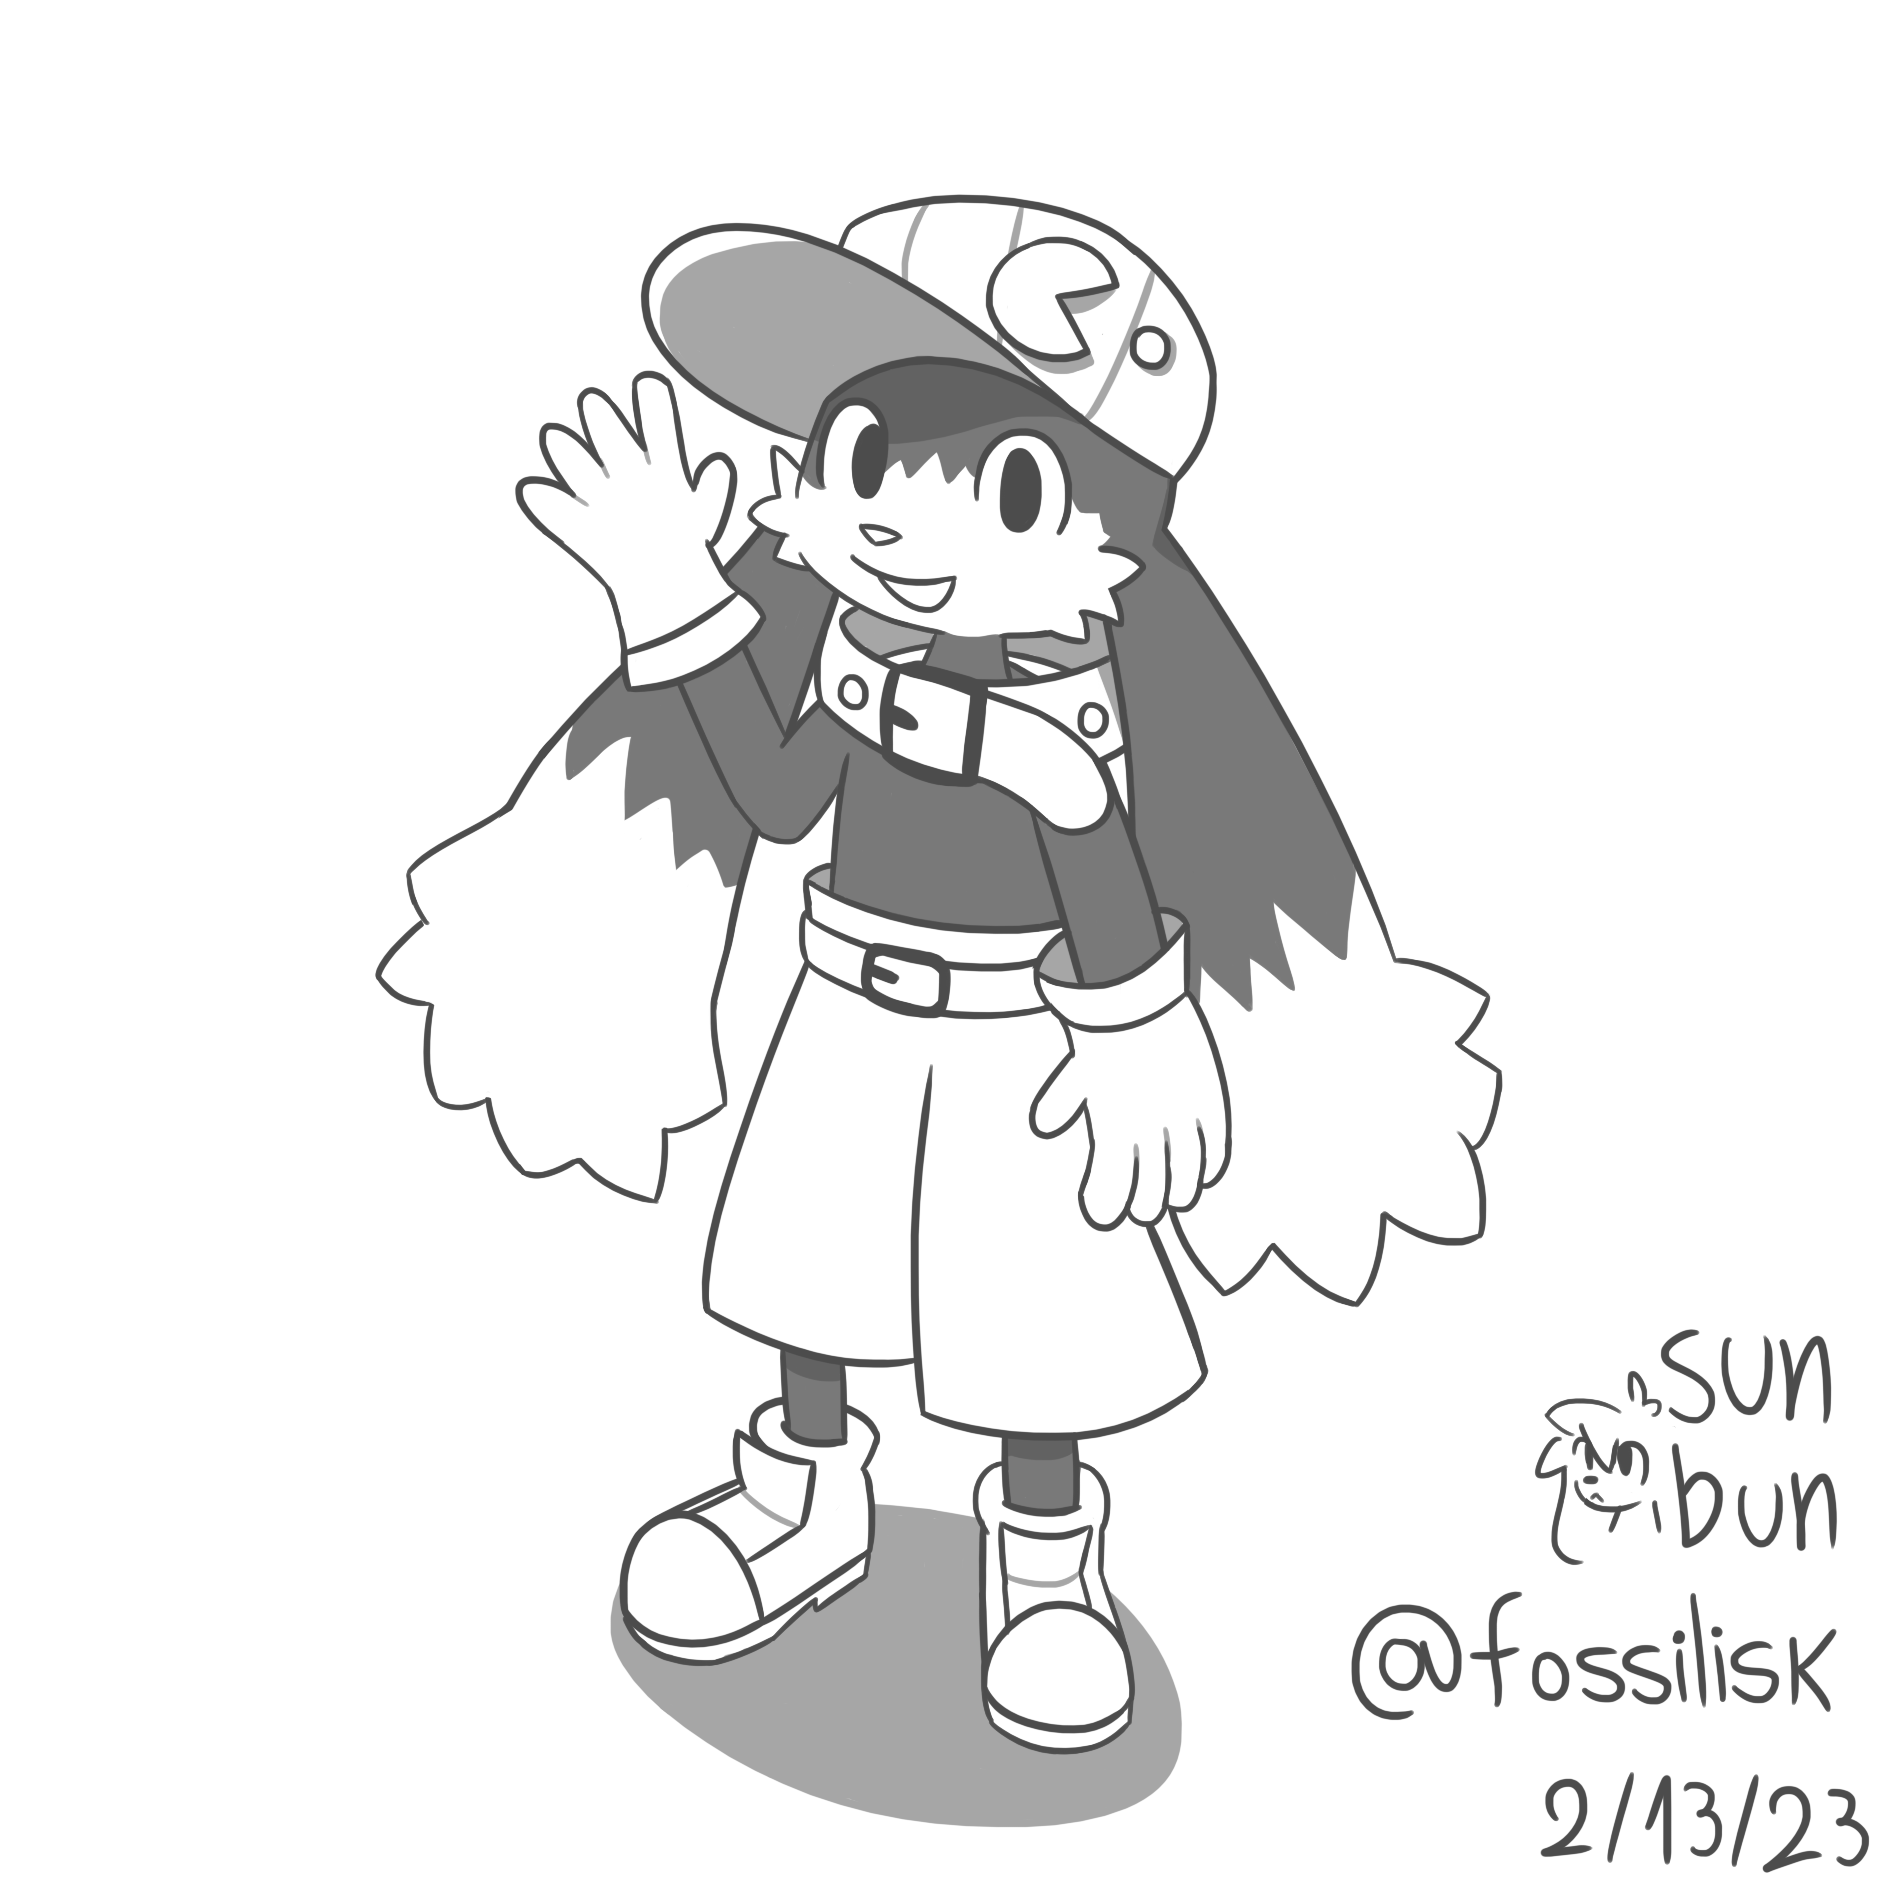 Monotone sketch of Klonoa ...from Klonoa. He's standing, looking at the viewer and waving his hand.